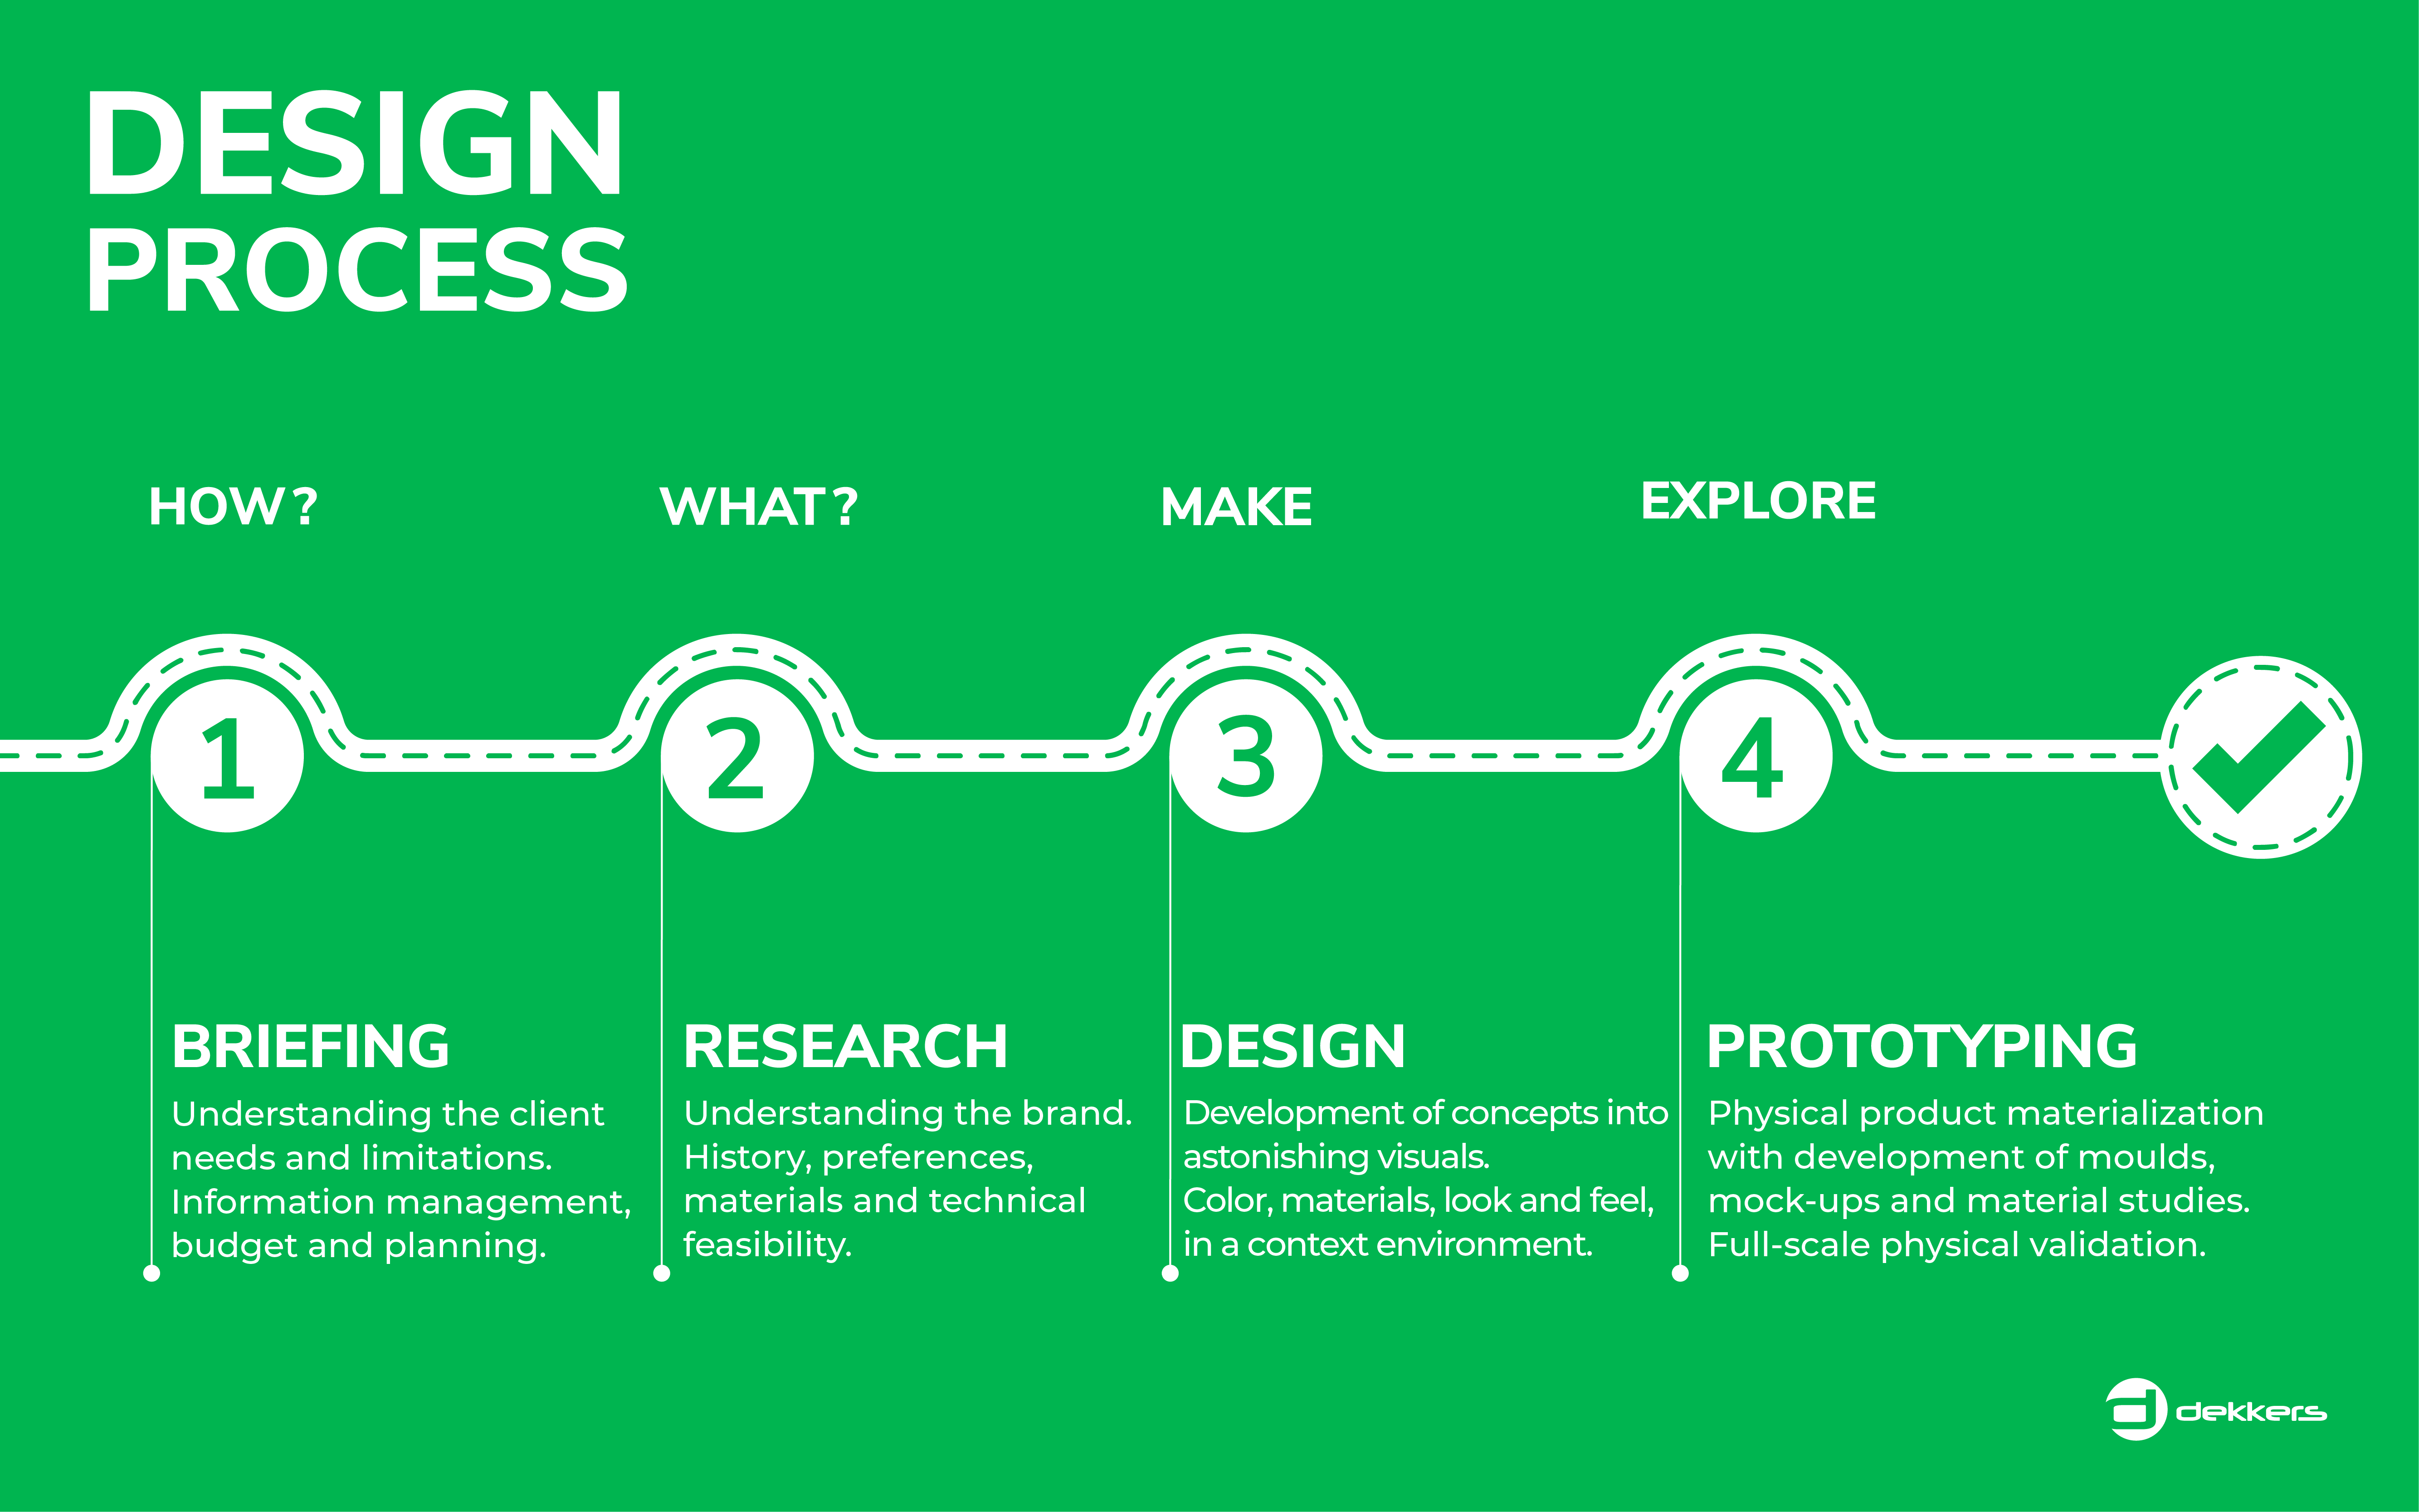 Dekkers' step by step design process infographic